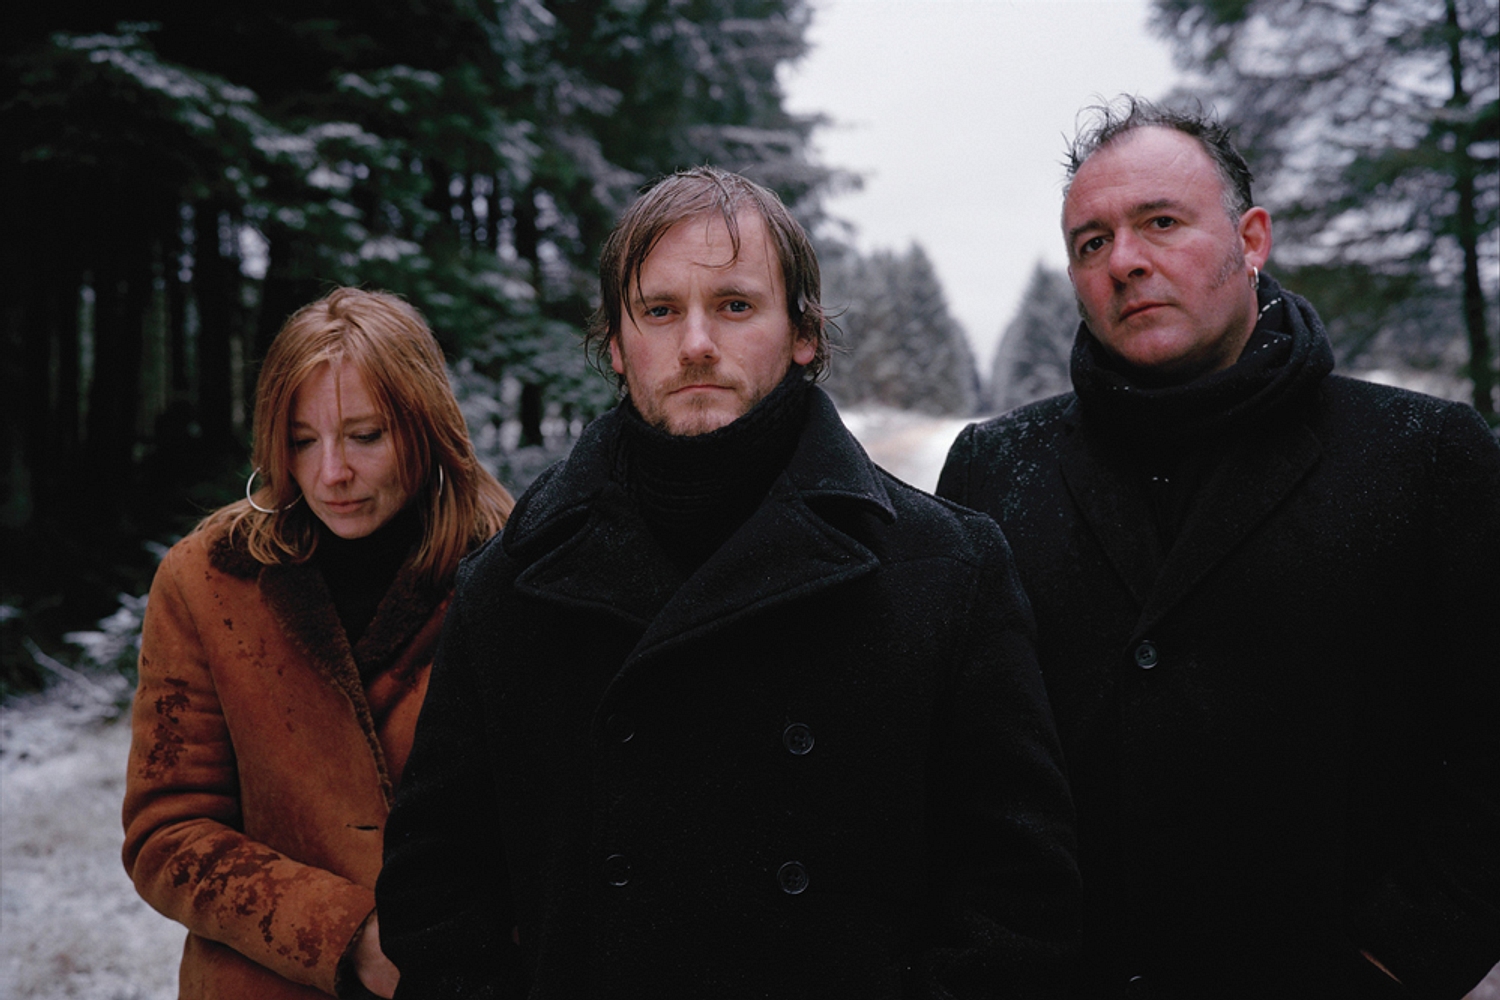 Portishead, Wolf Alice and James Blake continue Latitude 2015 on day two